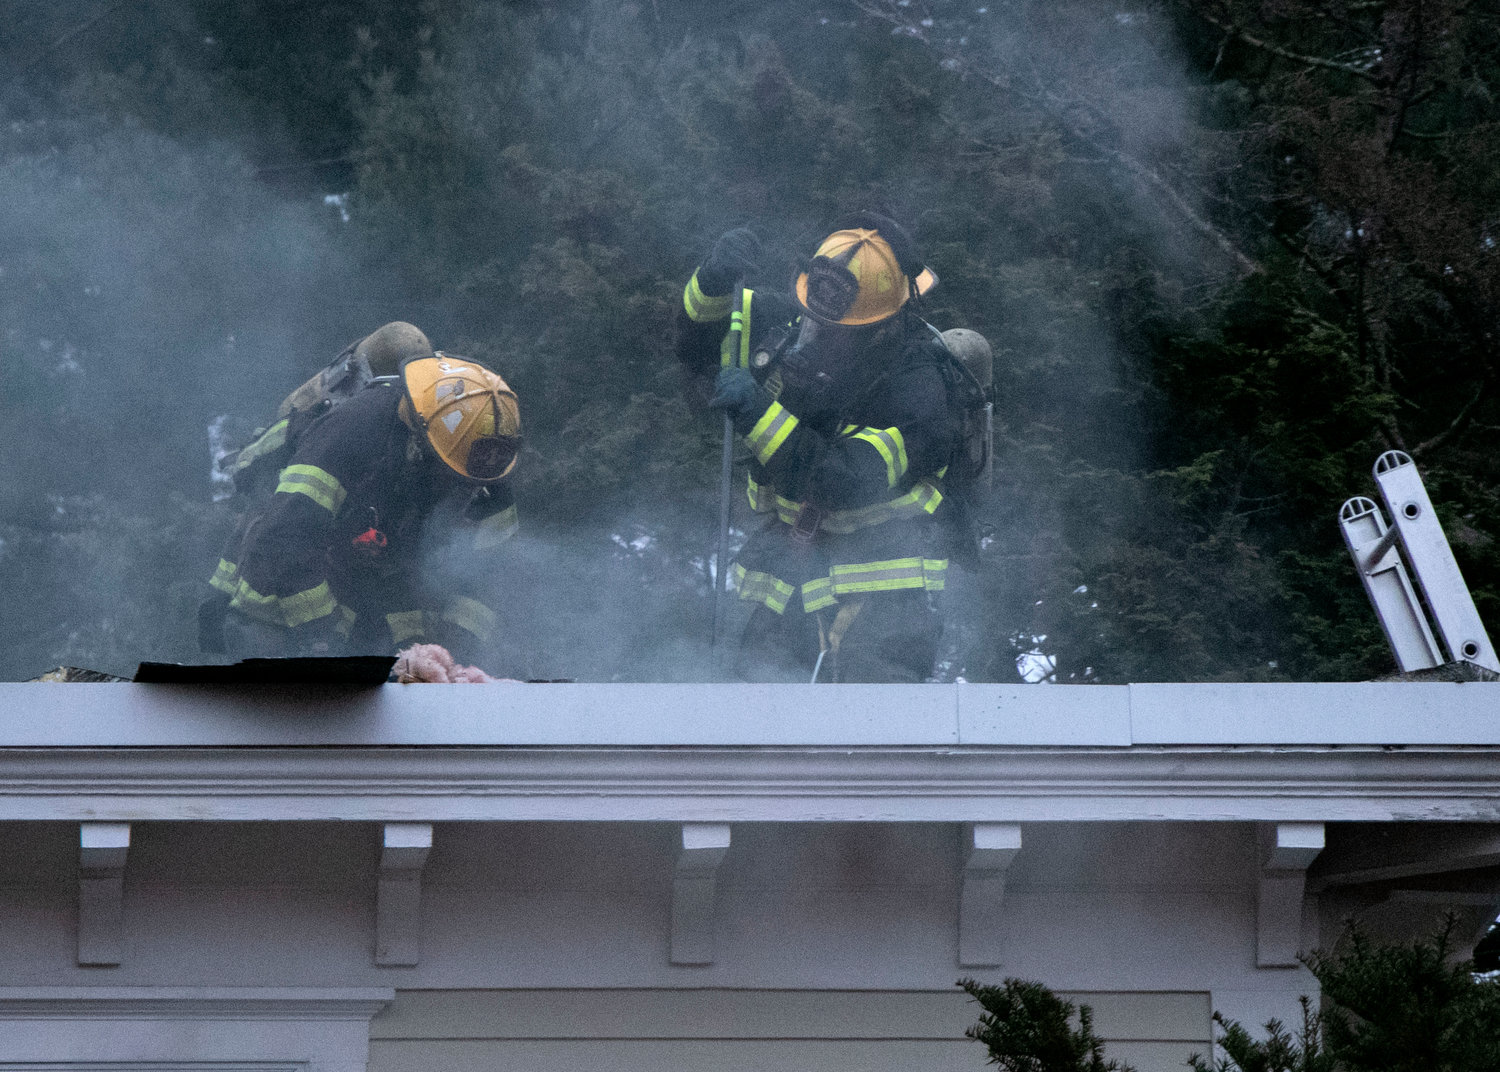 A plume of smoke rises from a hole that firefighters cut into the roof of a home on Alfred Drown Road as they battle a blaze on Saturday, Dec. 4. 
Firefighters from Barrington and four other departments responded to a house fire that began in the afternoon.